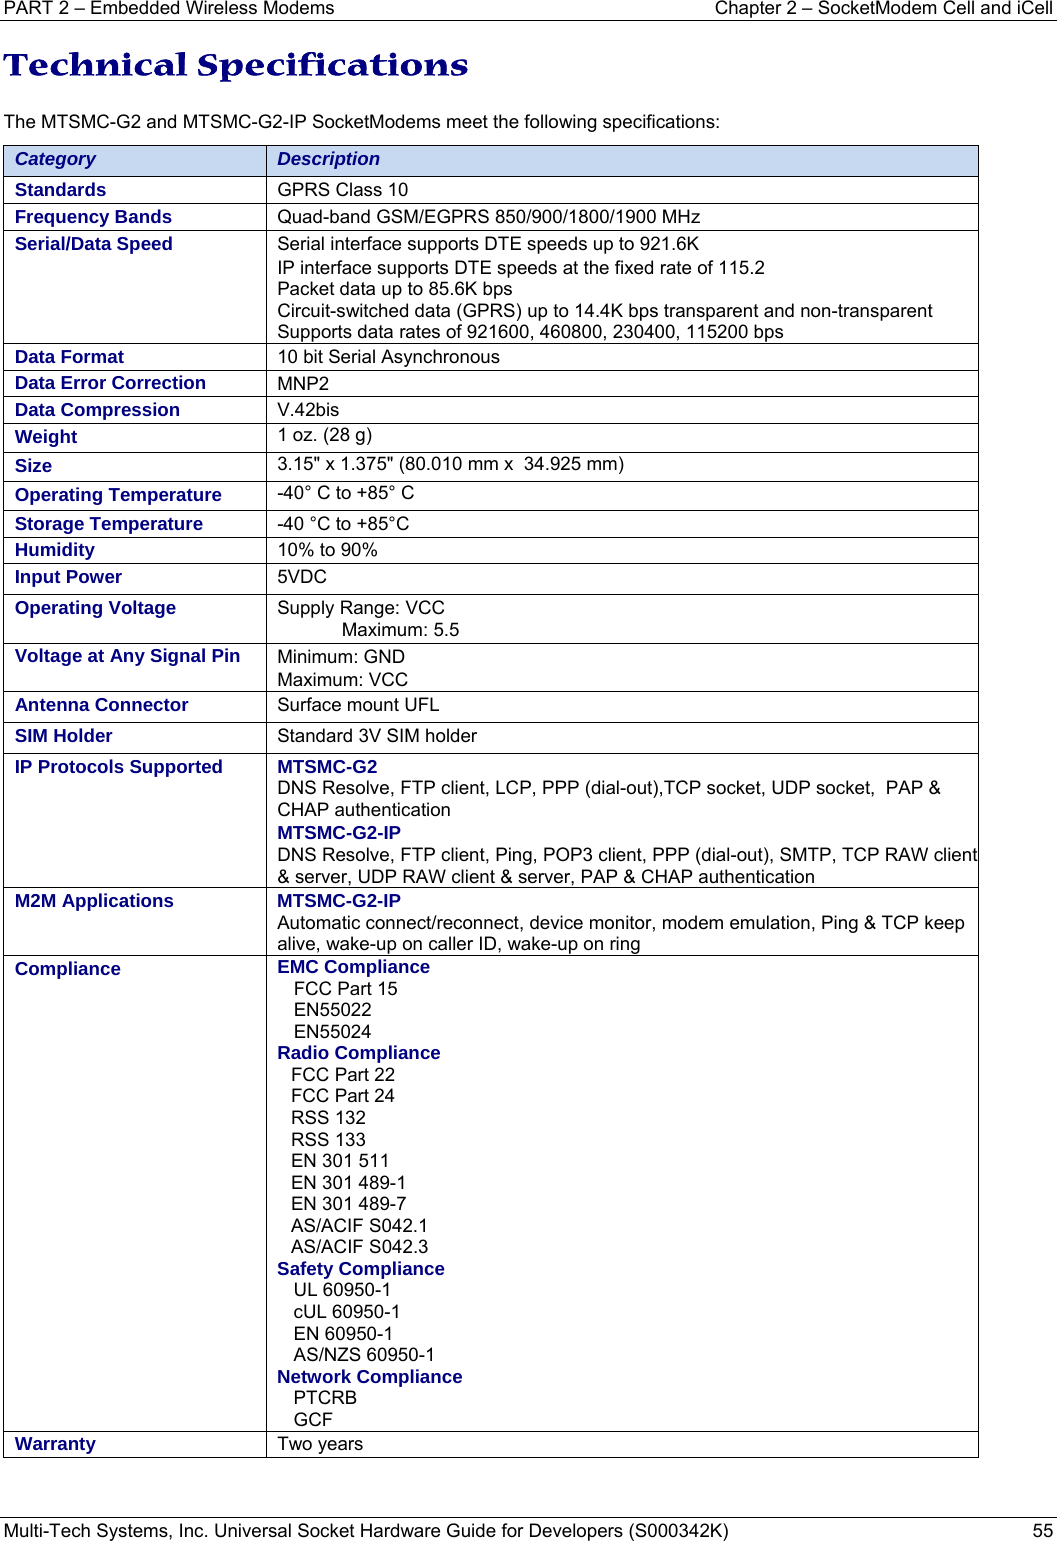 PART 2 – Embedded Wireless Modems   Chapter 2 – SocketModem Cell and iCell Multi-Tech Systems, Inc. Universal Socket Hardware Guide for Developers (S000342K)  55  Technical Specifications  The MTSMC-G2 and MTSMC-G2-IP SocketModems meet the following specifications:  Category  Description Standards  GPRS Class 10 Frequency Bands  Quad-band GSM/EGPRS 850/900/1800/1900 MHz  Serial/Data Speed  Serial interface supports DTE speeds up to 921.6K IP interface supports DTE speeds at the fixed rate of 115.2  Packet data up to 85.6K bps Circuit-switched data (GPRS) up to 14.4K bps transparent and non-transparent Supports data rates of 921600, 460800, 230400, 115200 bps Data Format  10 bit Serial Asynchronous Data Error Correction  MNP2 Data Compression  V.42bis Weight  1 oz. (28 g)   Size  3.15&quot; x 1.375&quot; (80.010 mm x  34.925 mm) Operating Temperature  -40° C to +85° C  Storage Temperature  -40 °C to +85°C  Humidity  10% to 90%  Input Power   5VDC   Operating Voltage  Supply Range: VCC Maximum: 5.5 Voltage at Any Signal Pin  Minimum: GND Maximum: VCC Antenna Connector  Surface mount UFL  SIM Holder  Standard 3V SIM holder IP Protocols Supported  MTSMC-G2 DNS Resolve, FTP client, LCP, PPP (dial-out),TCP socket, UDP socket,  PAP &amp; CHAP authentication MTSMC-G2-IP DNS Resolve, FTP client, Ping, POP3 client, PPP (dial-out), SMTP, TCP RAW client &amp; server, UDP RAW client &amp; server, PAP &amp; CHAP authentication M2M Applications   MTSMC-G2-IP Automatic connect/reconnect, device monitor, modem emulation, Ping &amp; TCP keep alive, wake-up on caller ID, wake-up on ring Compliance  EMC ComplianceFCC Part 15     EN55022    EN55024 Radio Compliance    FCC Part 22 FCC Part 24 RSS 132 RSS 133 EN 301 511 EN 301 489-1 EN 301 489-7 AS/ACIF S042.1 AS/ACIF S042.3    Safety Compliance    UL 60950-1     cUL 60950-1     EN 60950-1     AS/NZS 60950-1     Network Compliance PTCRB GCF Warranty  Two years   